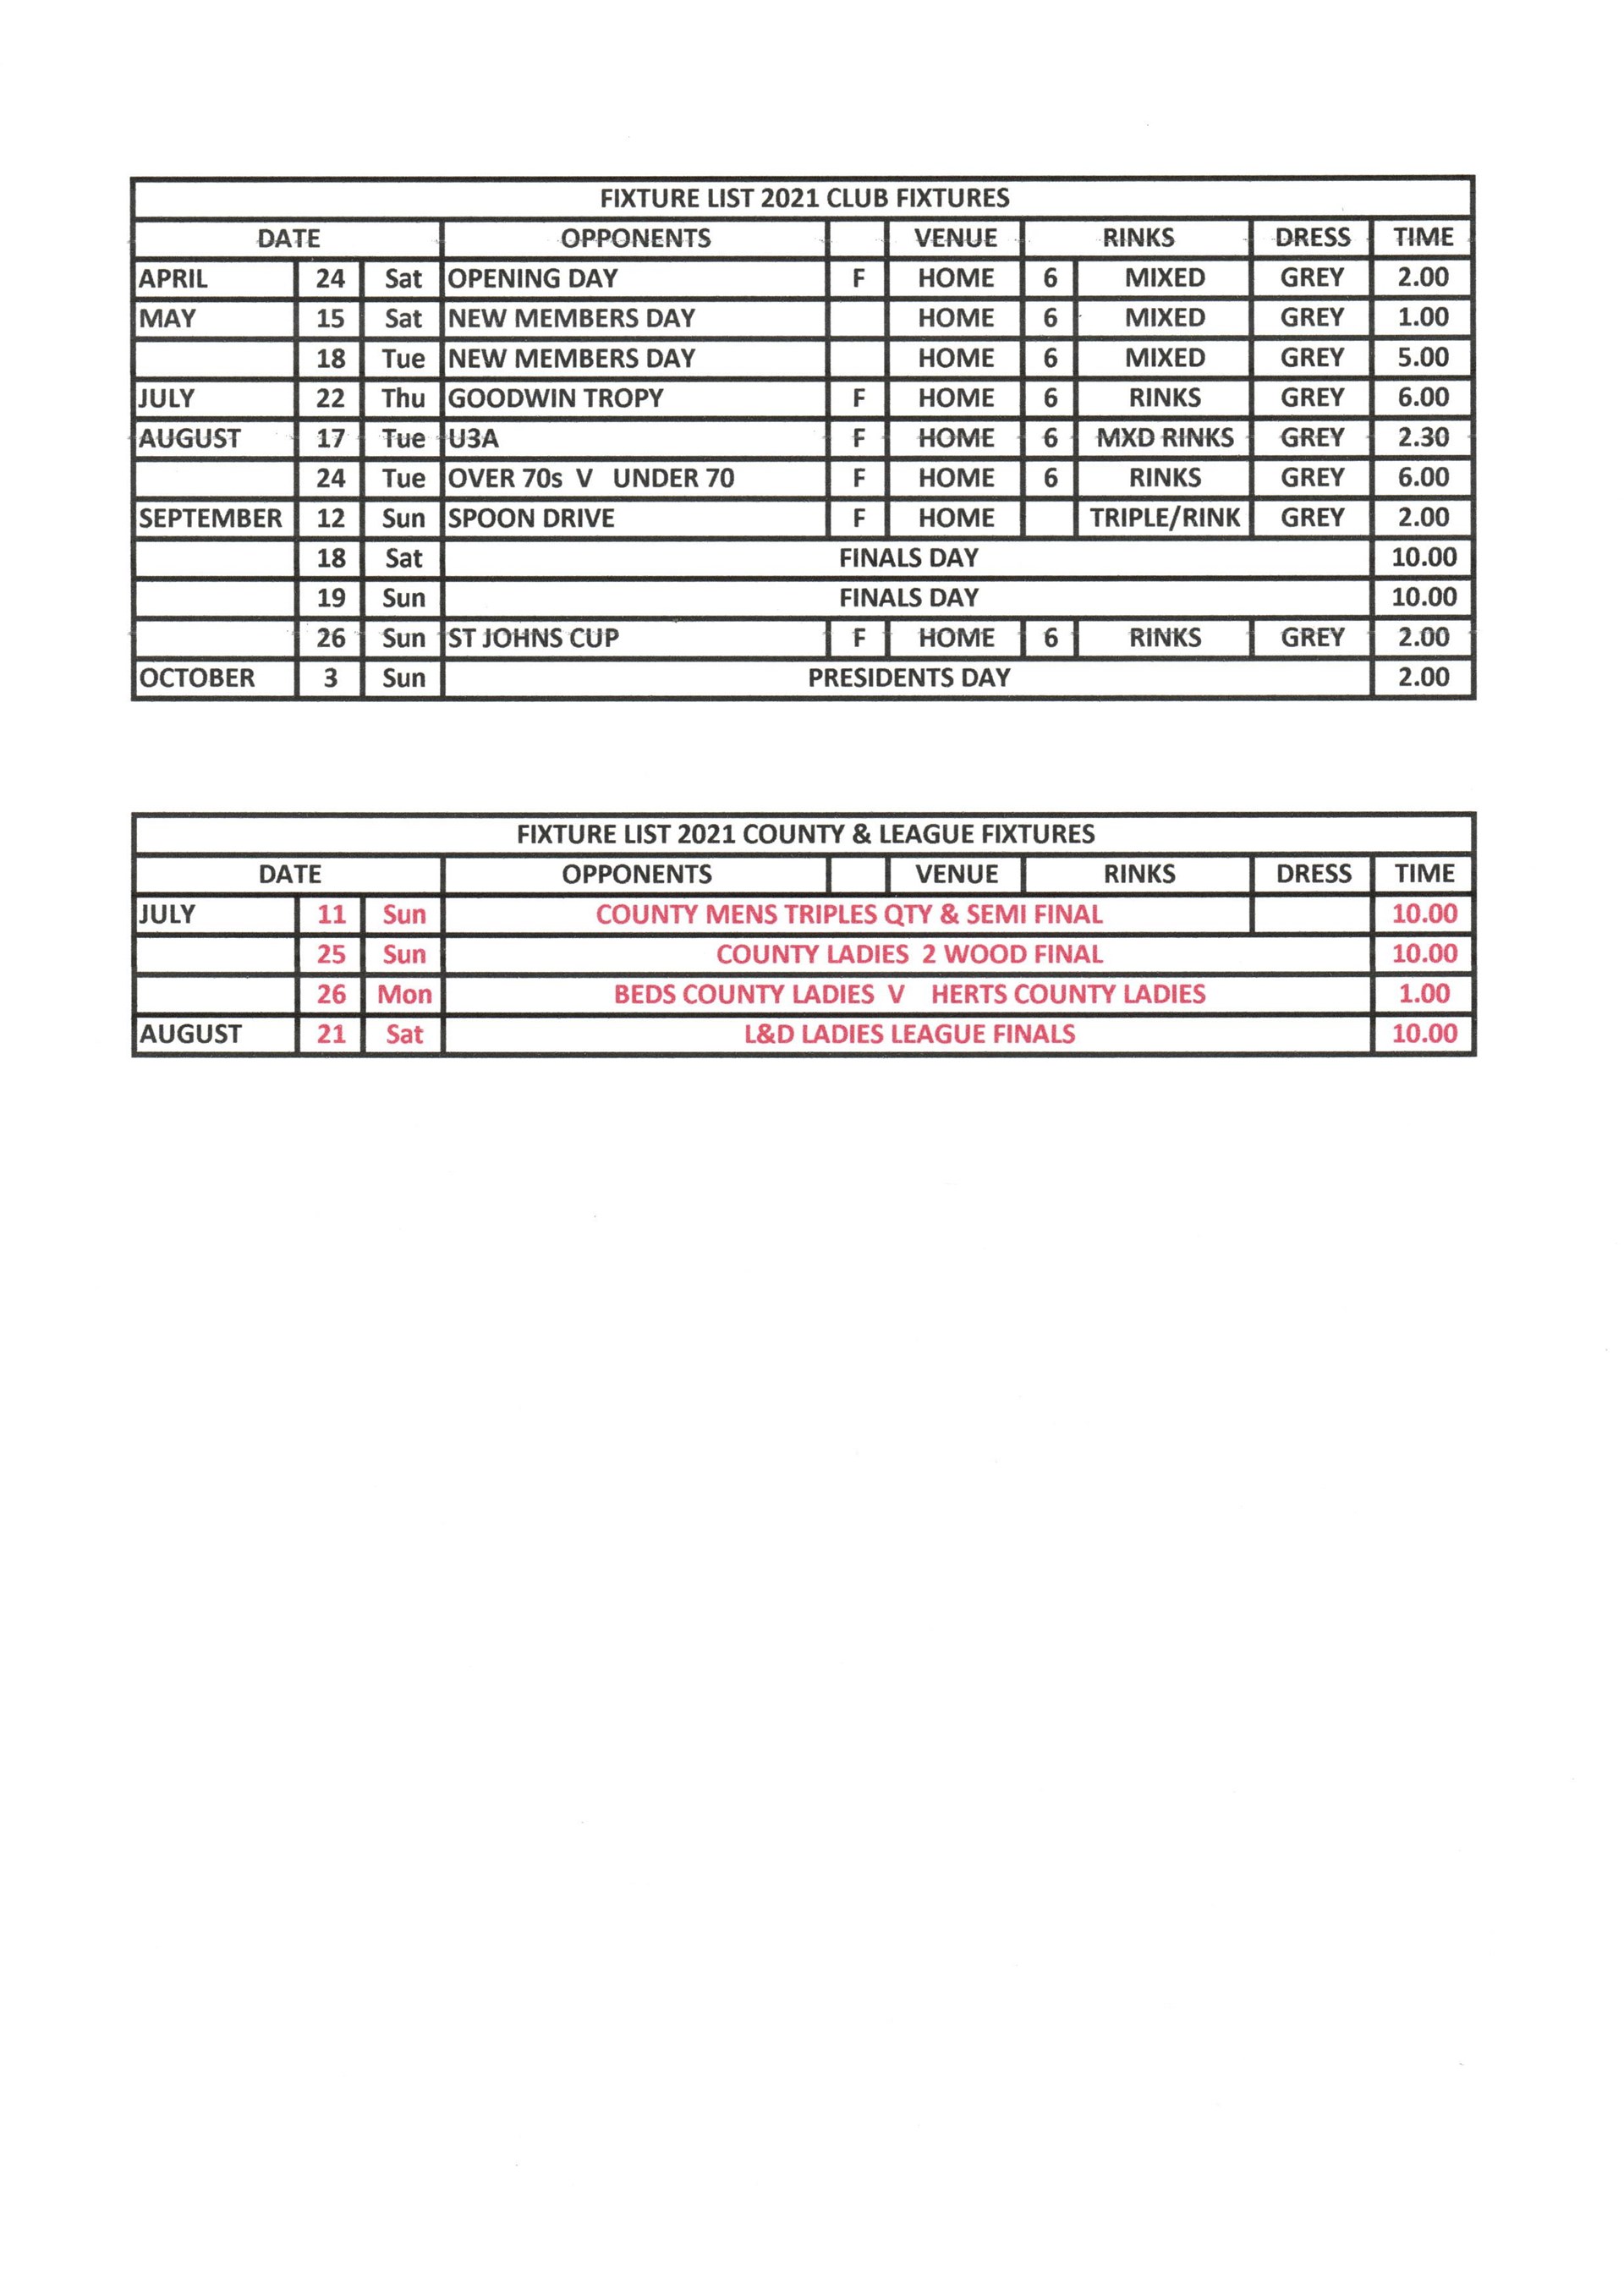 Linslade Bowls Club Other Fixtures - County & Internal